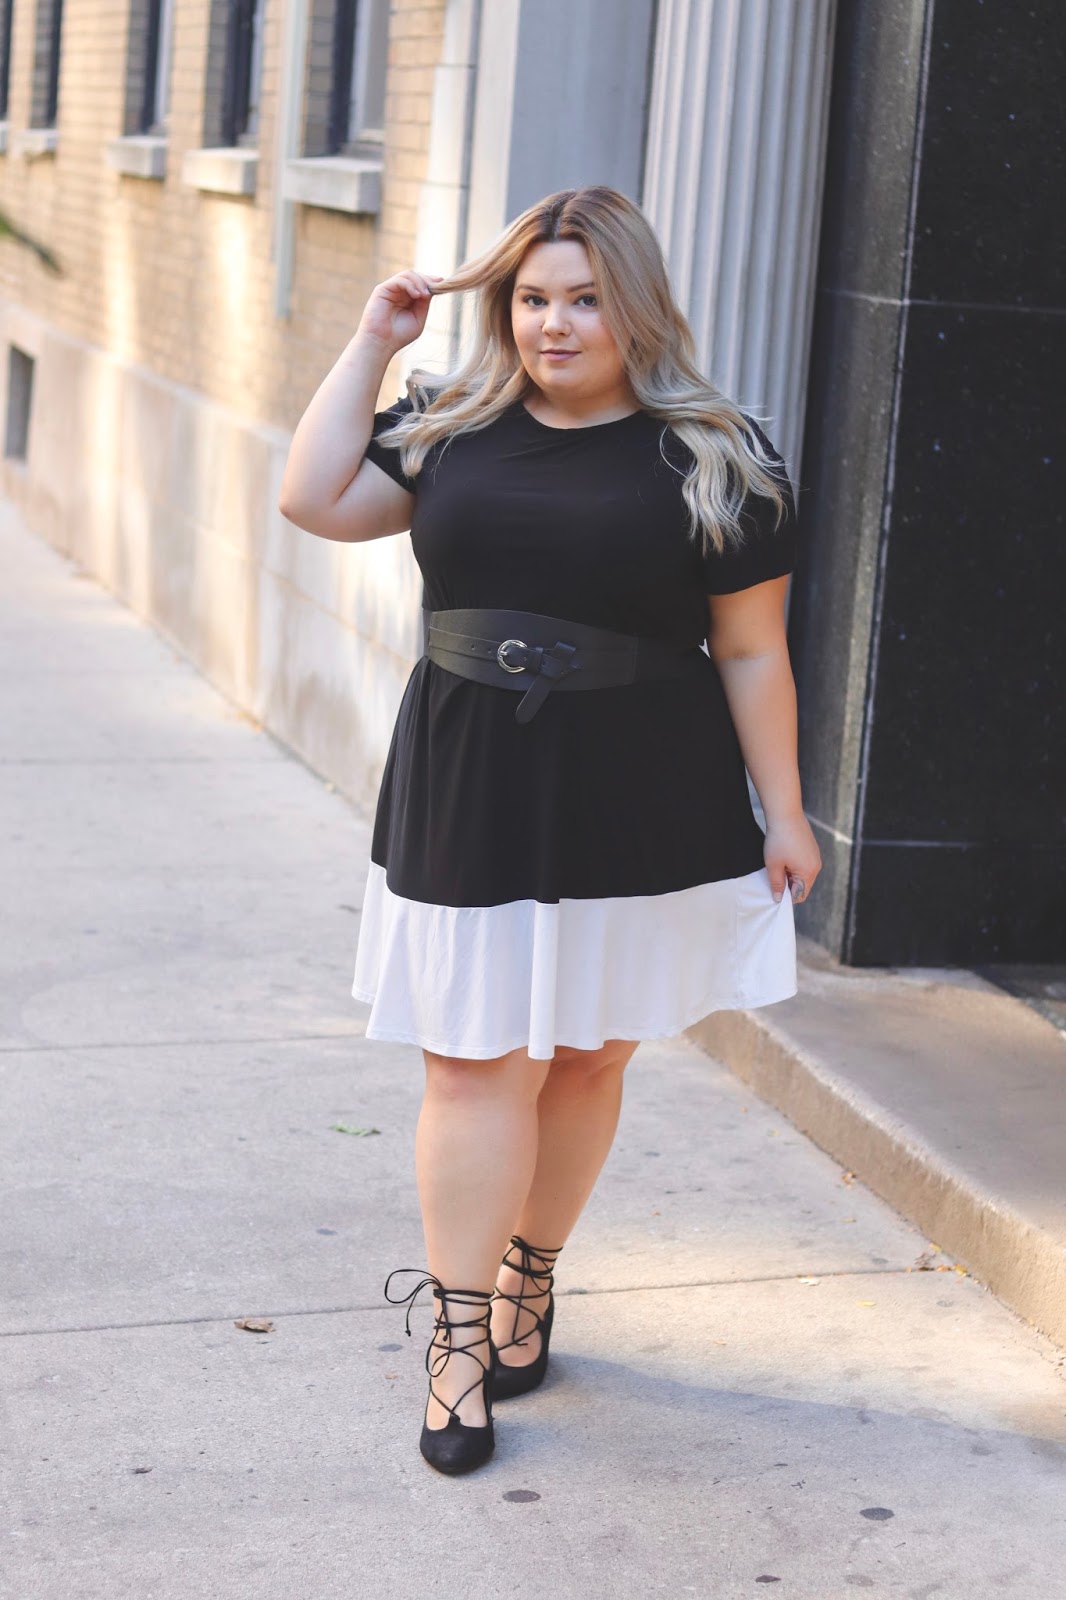 natalie in the city, dream big curvy girl fashion & beauty conference, the curvy con, full figured fashion week, the curvy fashionista, plus model magazine, fabulous, skorch magazine, plus size fashion, affordable plus size clothing, natalie craig, Chicago fashion blogger, plus size fashion blogger, color block dress, office attire, business casual plus size